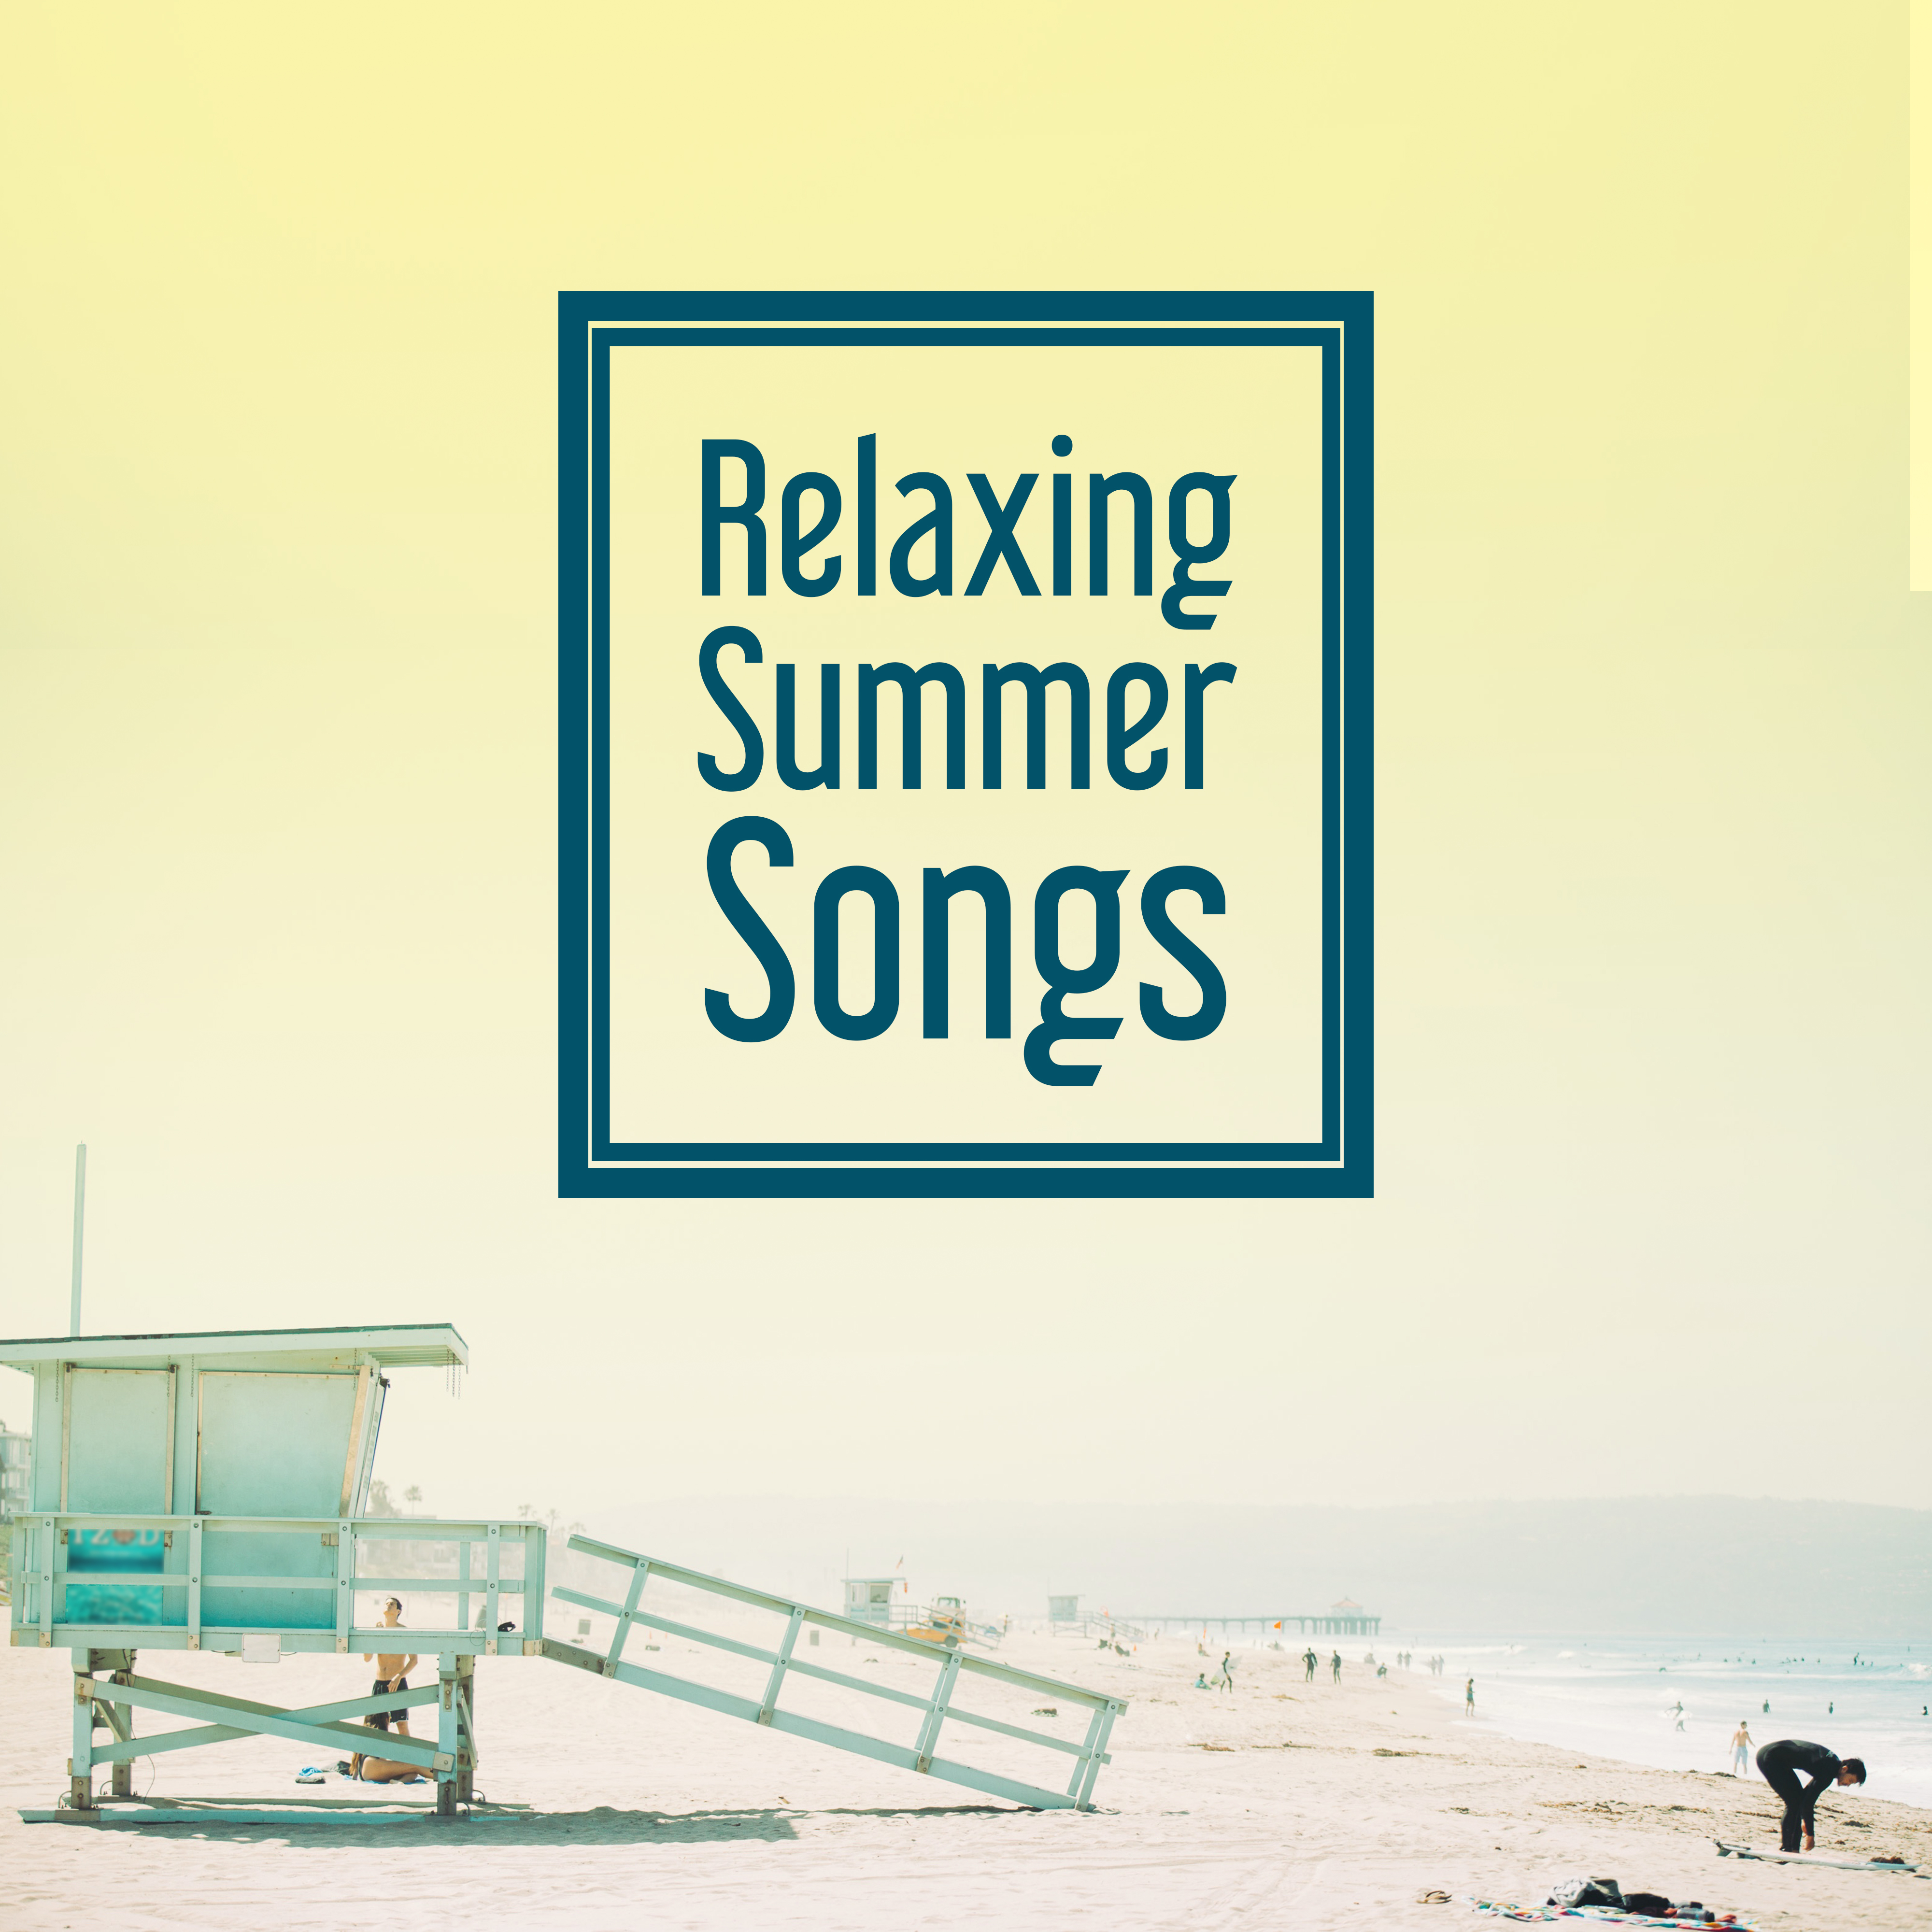 Relaxing Summer Songs – Chilled Music, Hot Beach Lounge, Sounds to Rest, Holiday Chill Out